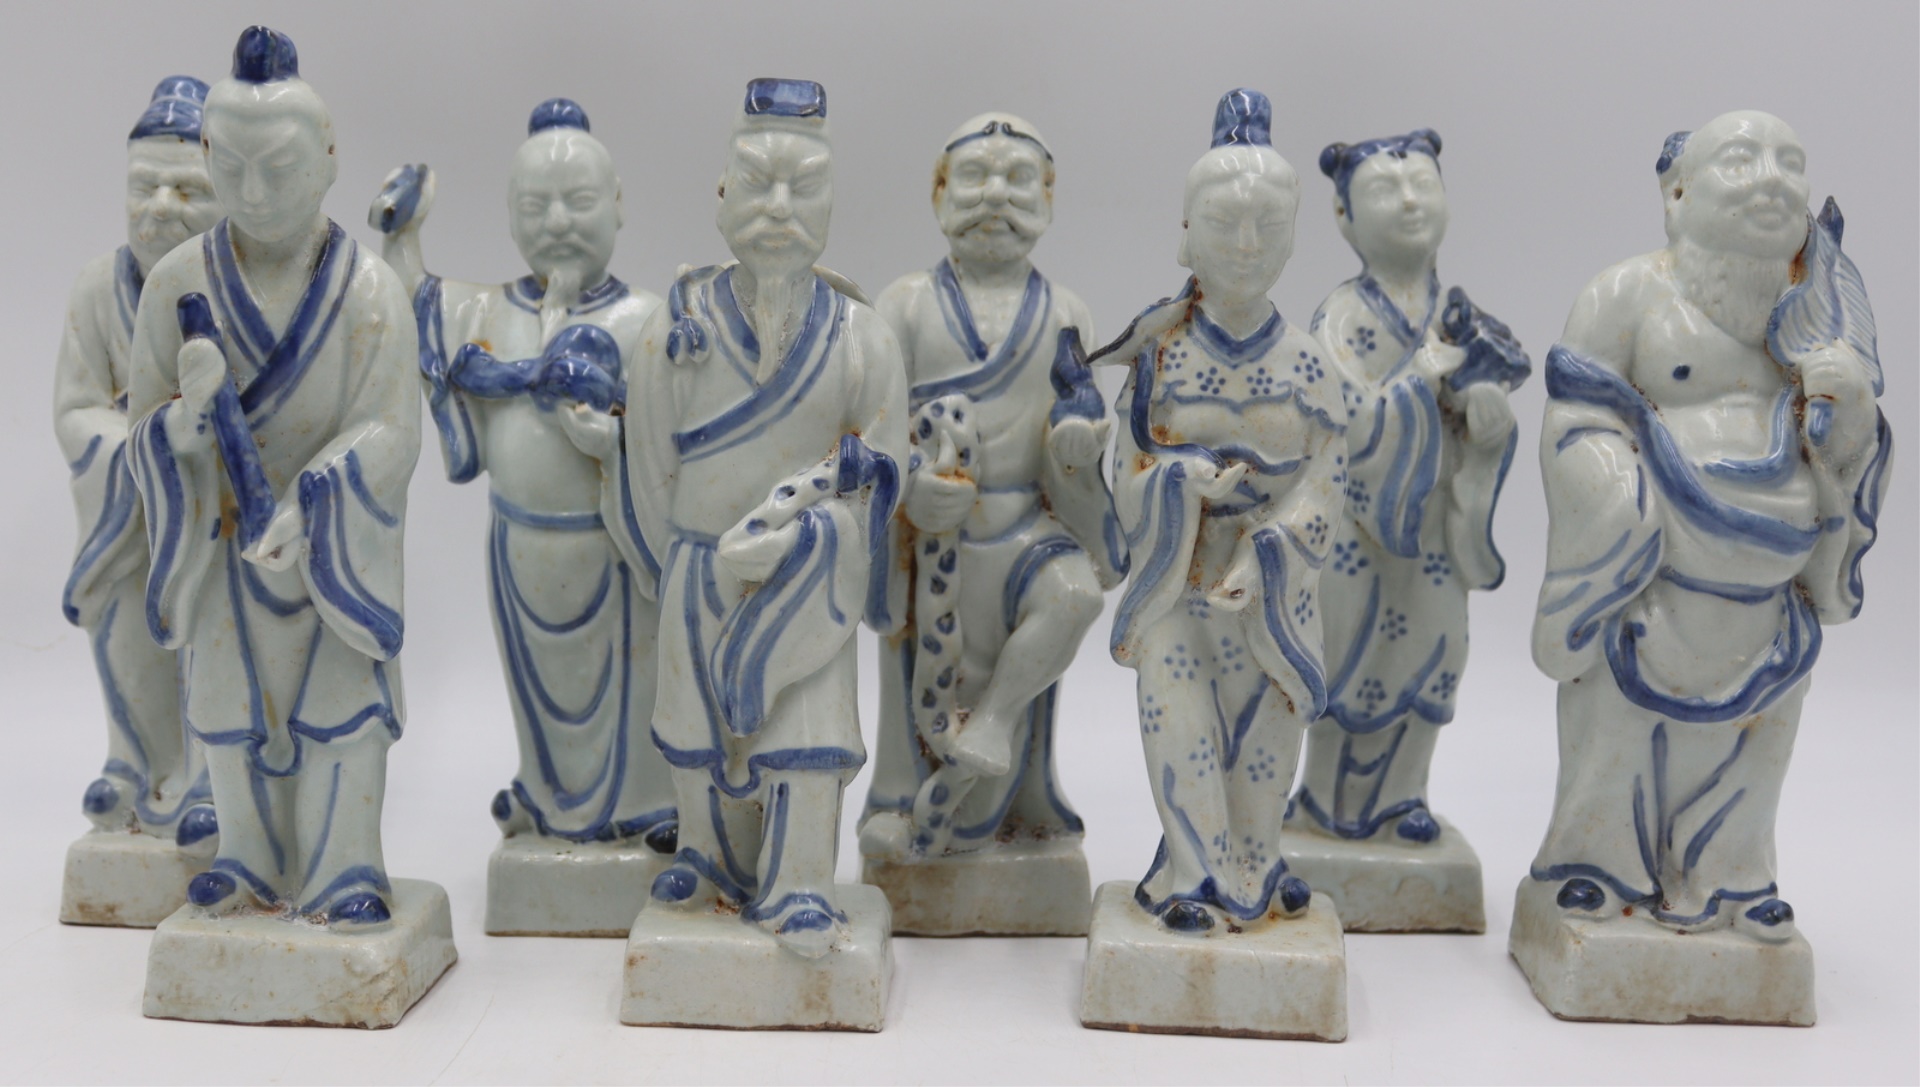  8 CHINESE BLUE AND WHITE STANDING 3bbe8a